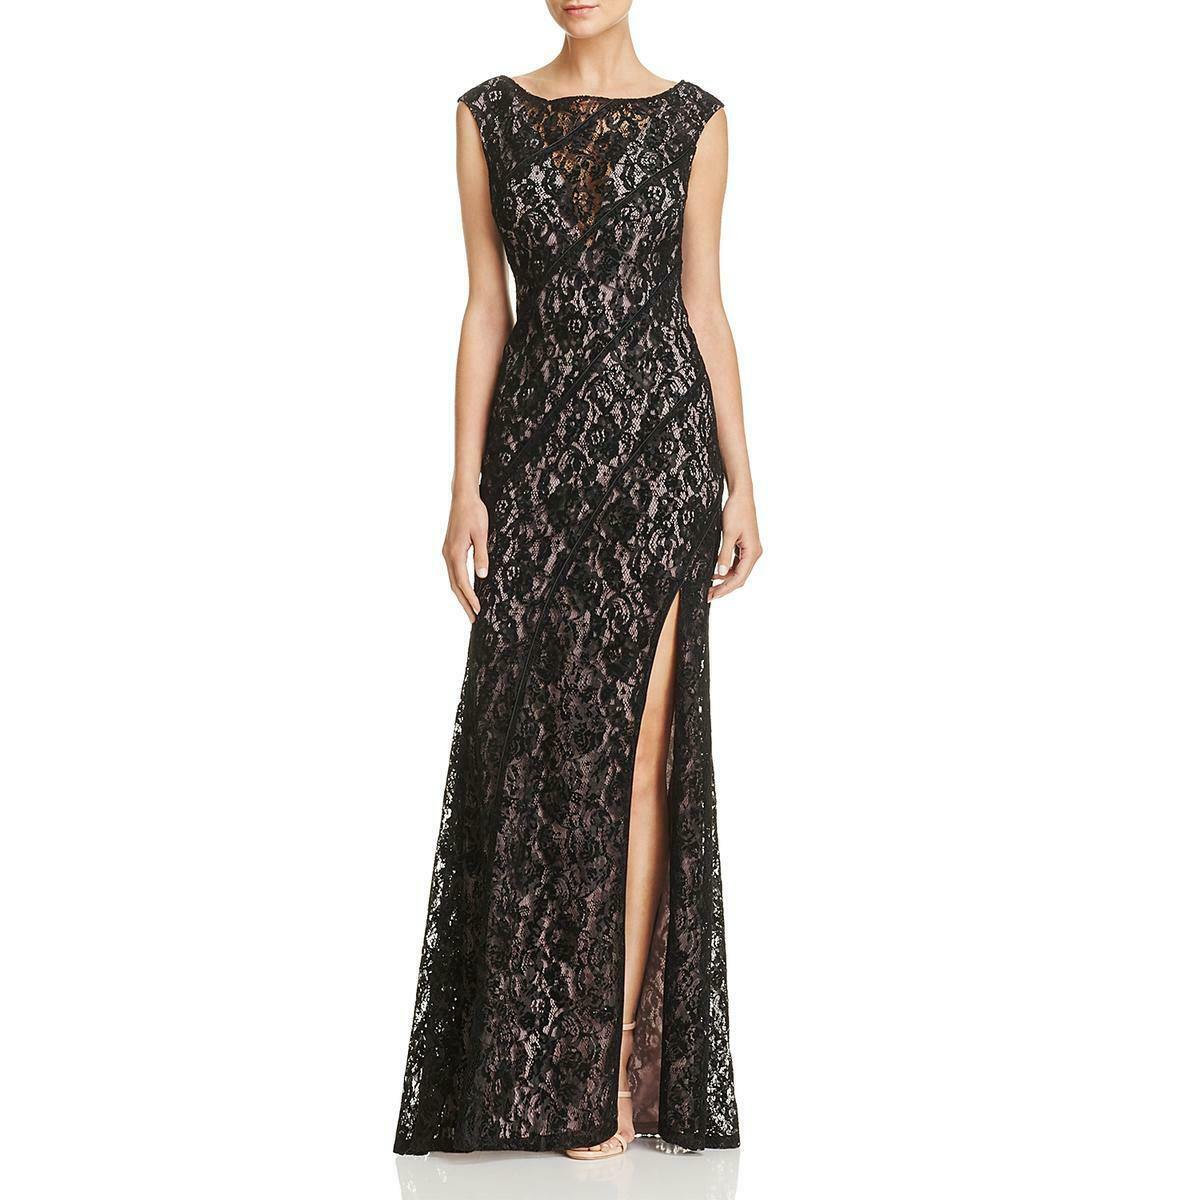 Aidan by Aidan Mattox Long Formal Floral Lace Dress - The Dress Outlet